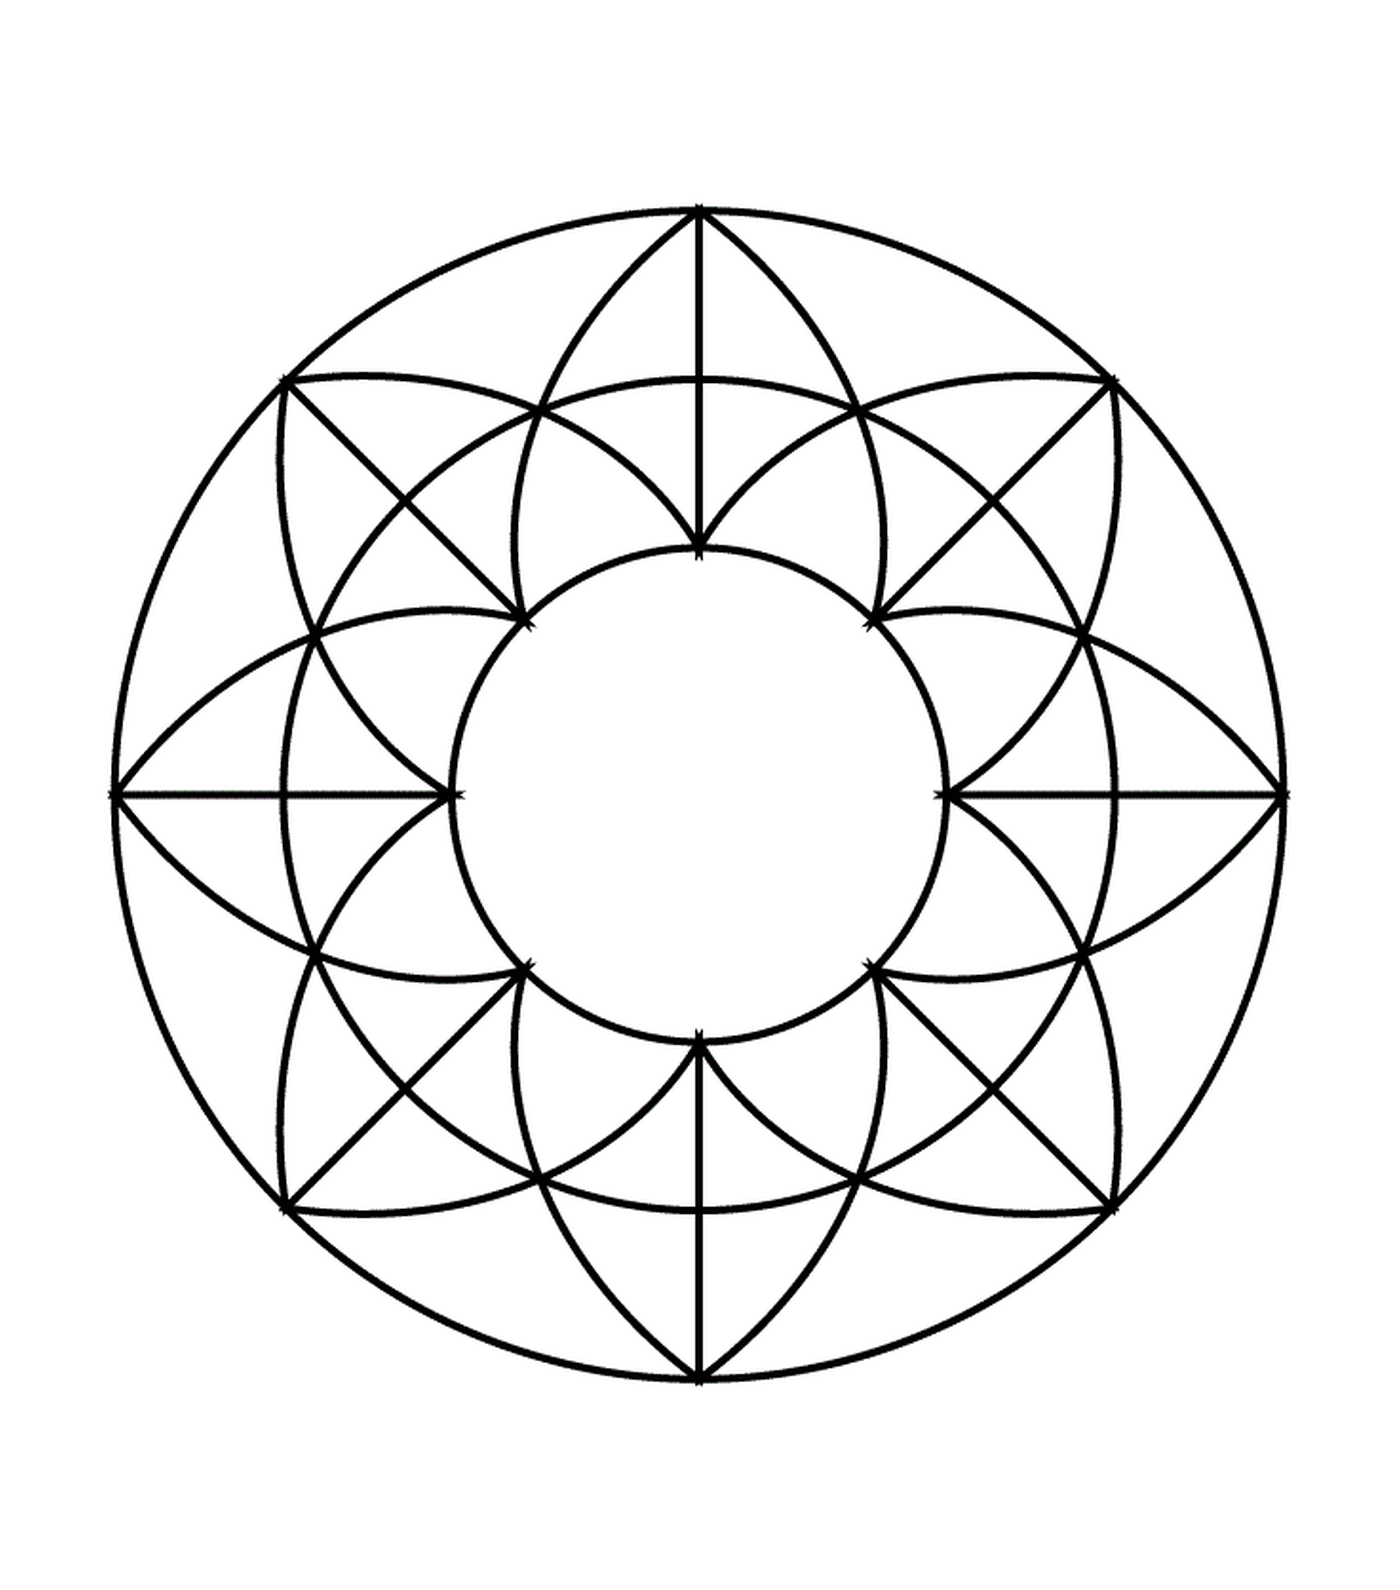  A circle with a geometric pattern inside 